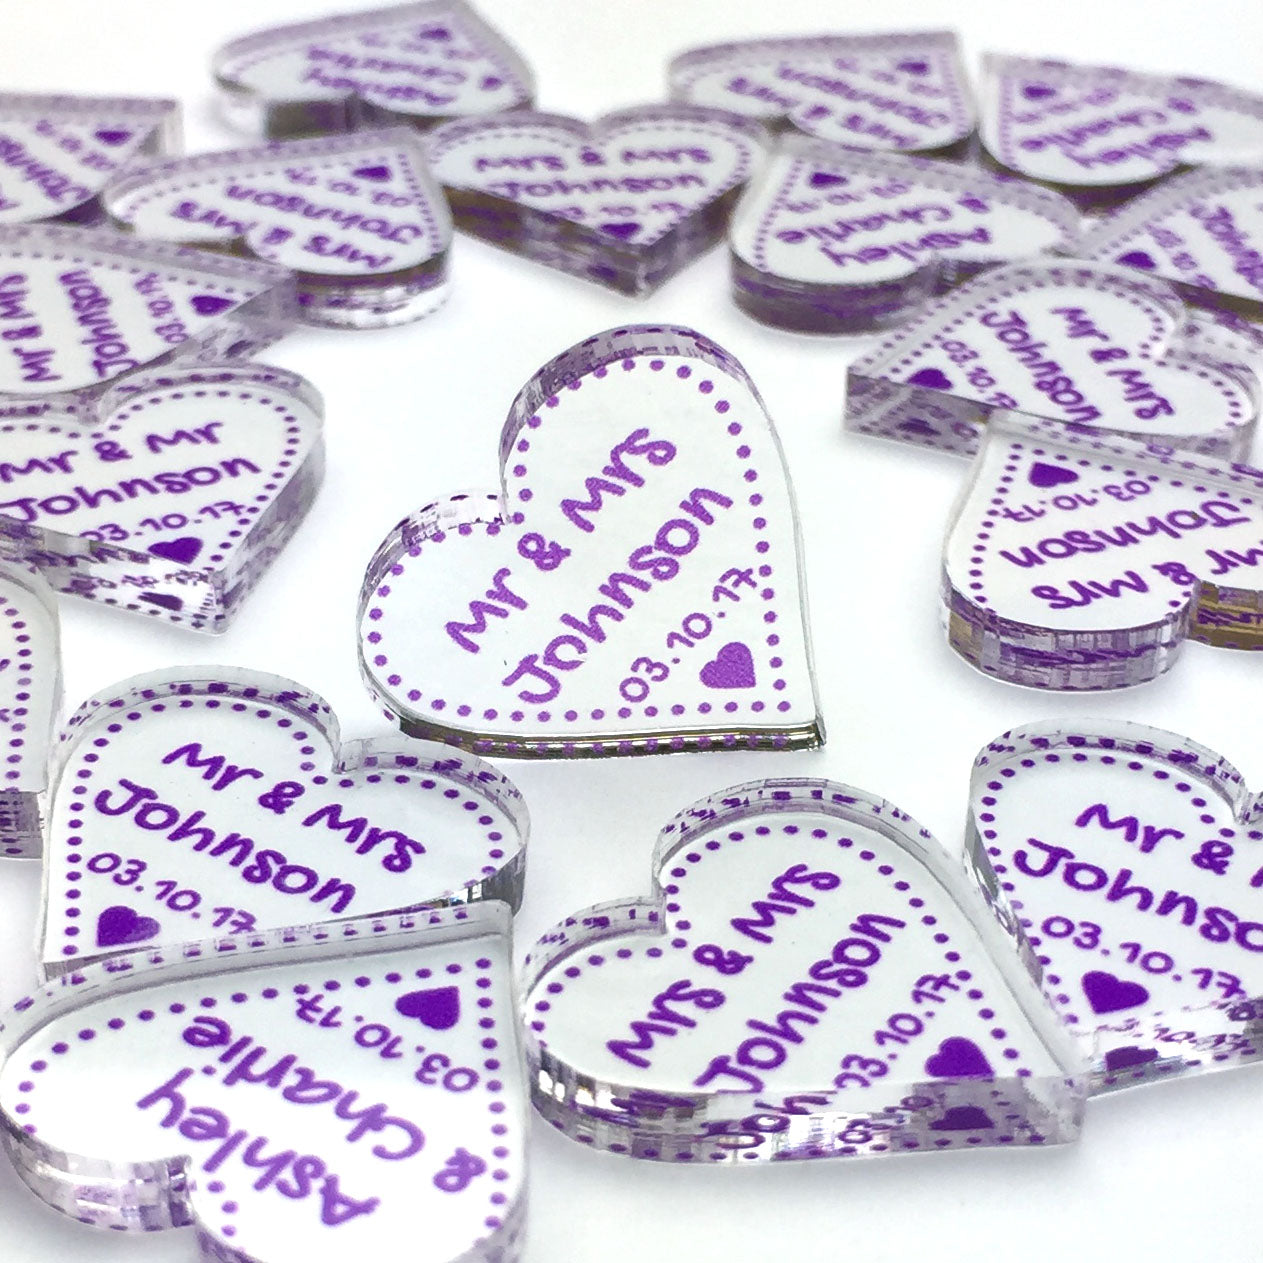 Personalised Wedding Favours - Clear Acrylic + Purple Acrylic Love Hearts